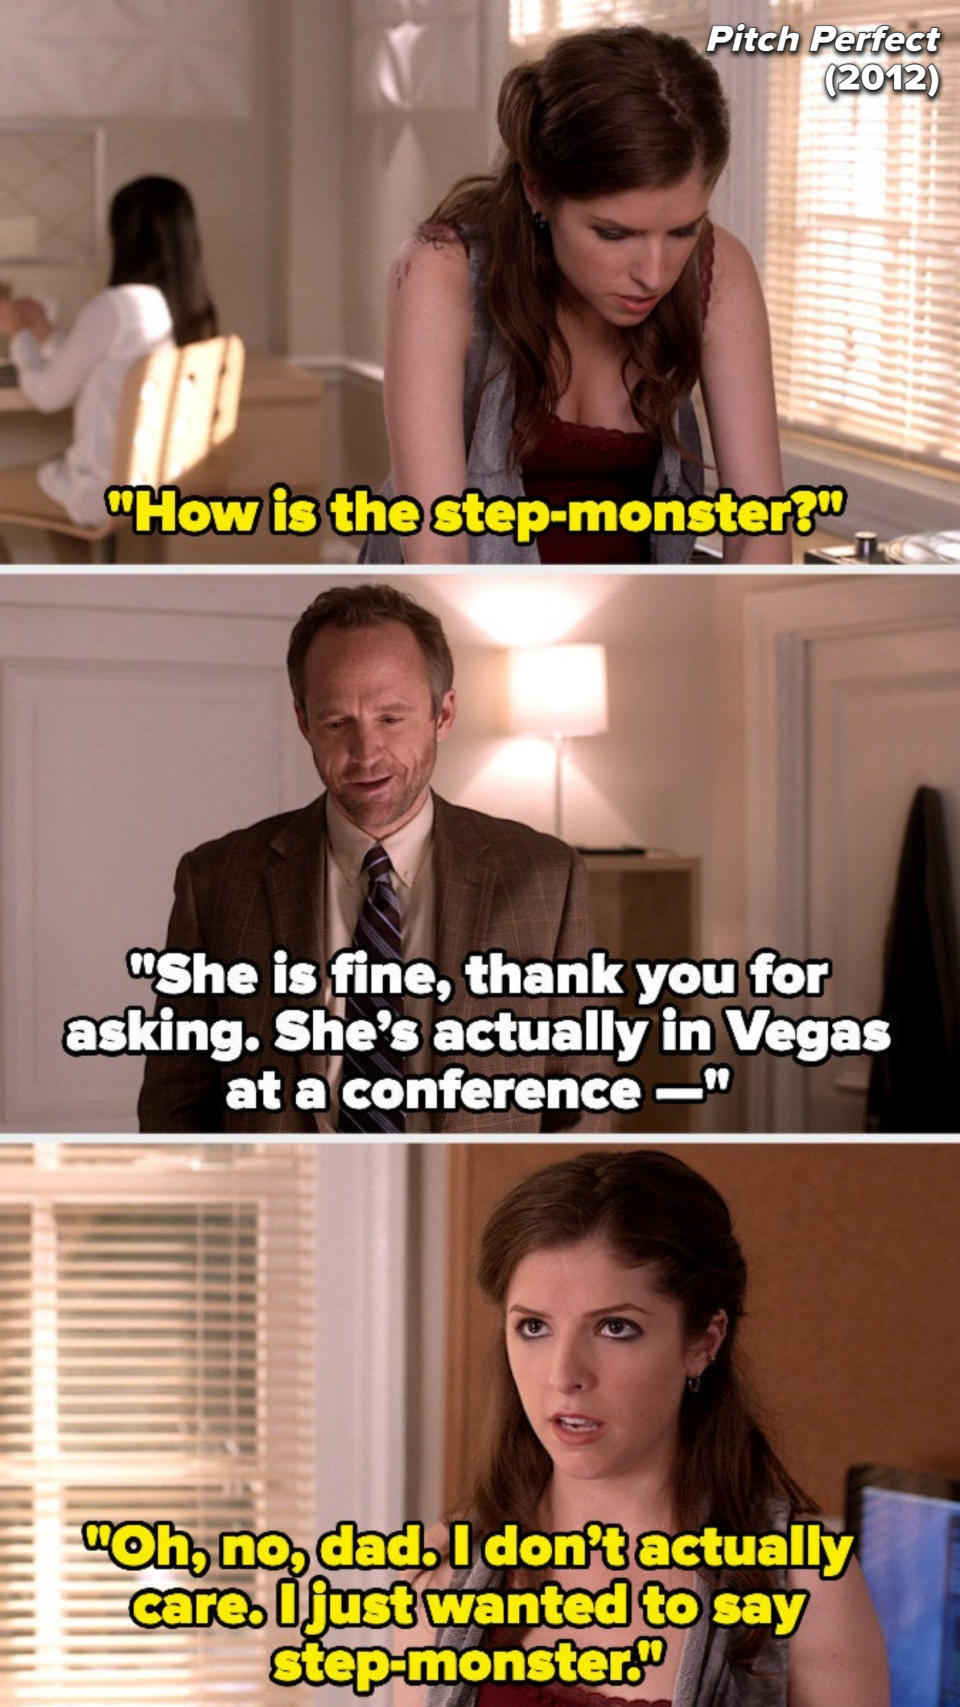 daughter: how is the step-monster? dad; she is fine thank you for asking she's actually in vegas at a conference. daughter: oh no dad i don't actually care i just wanted to say step-monster